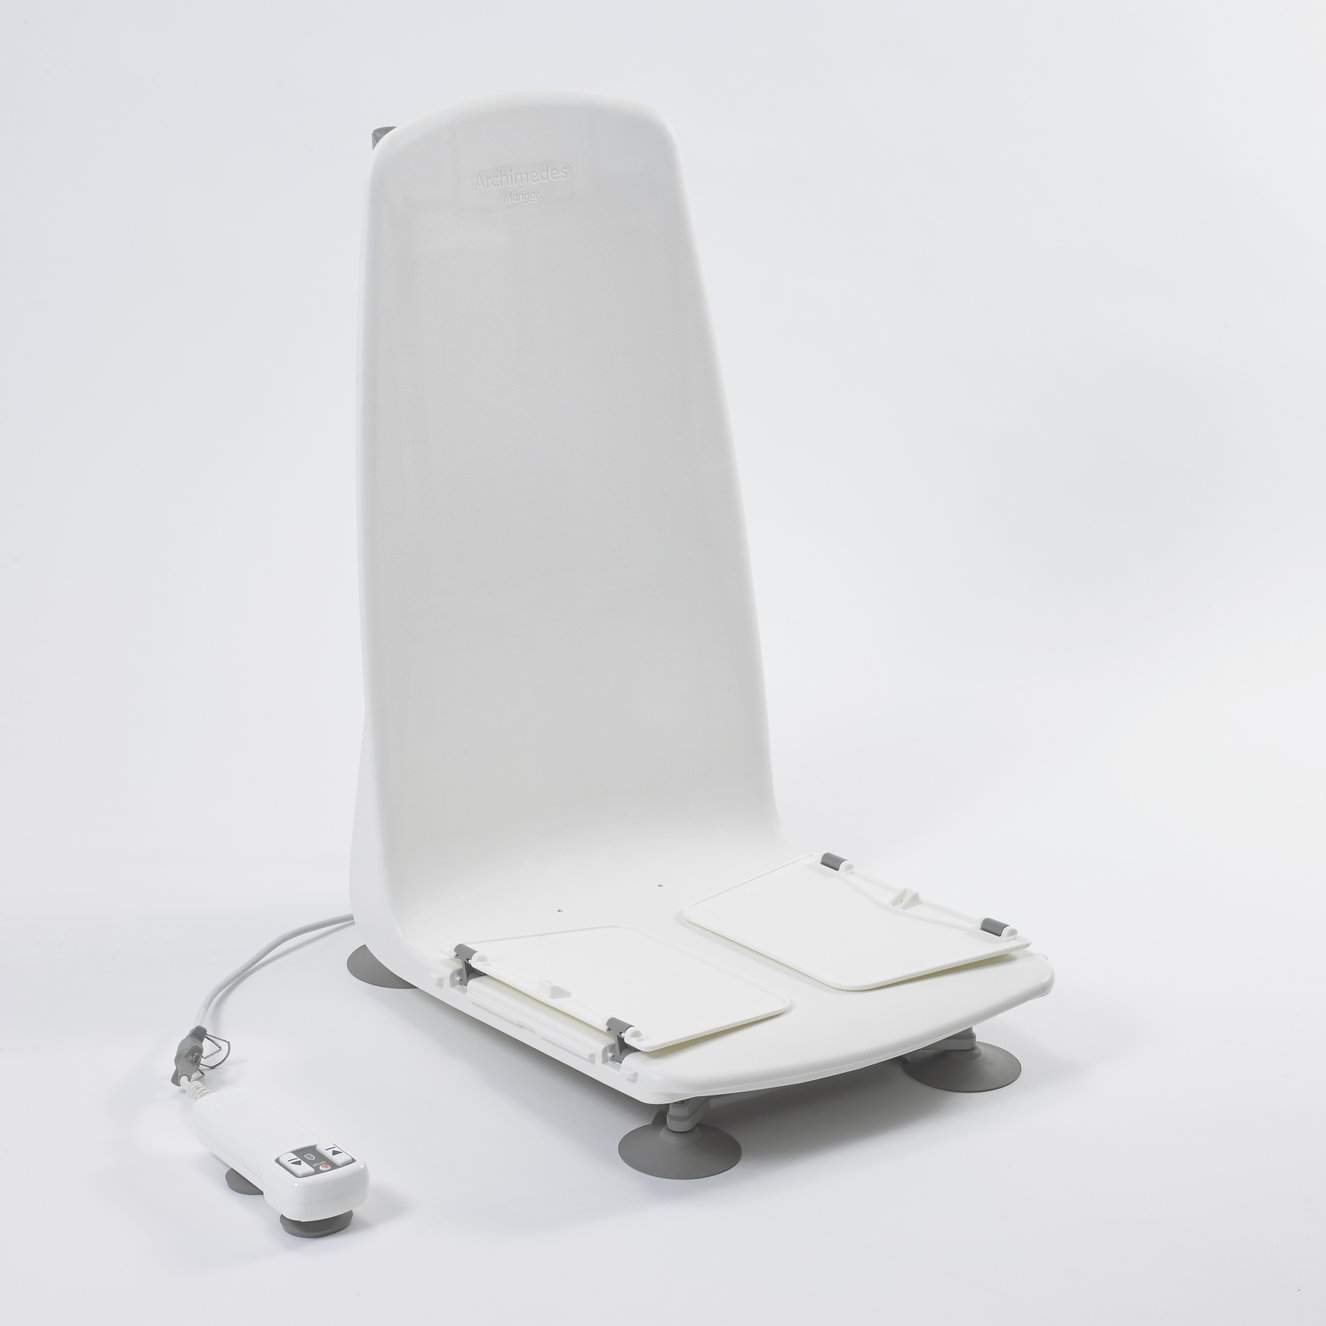 A image of a white plastic bath lift seat, with suction pads on the legs. It has a remote control attached to it so it can mechanically lift and lower from the bath.